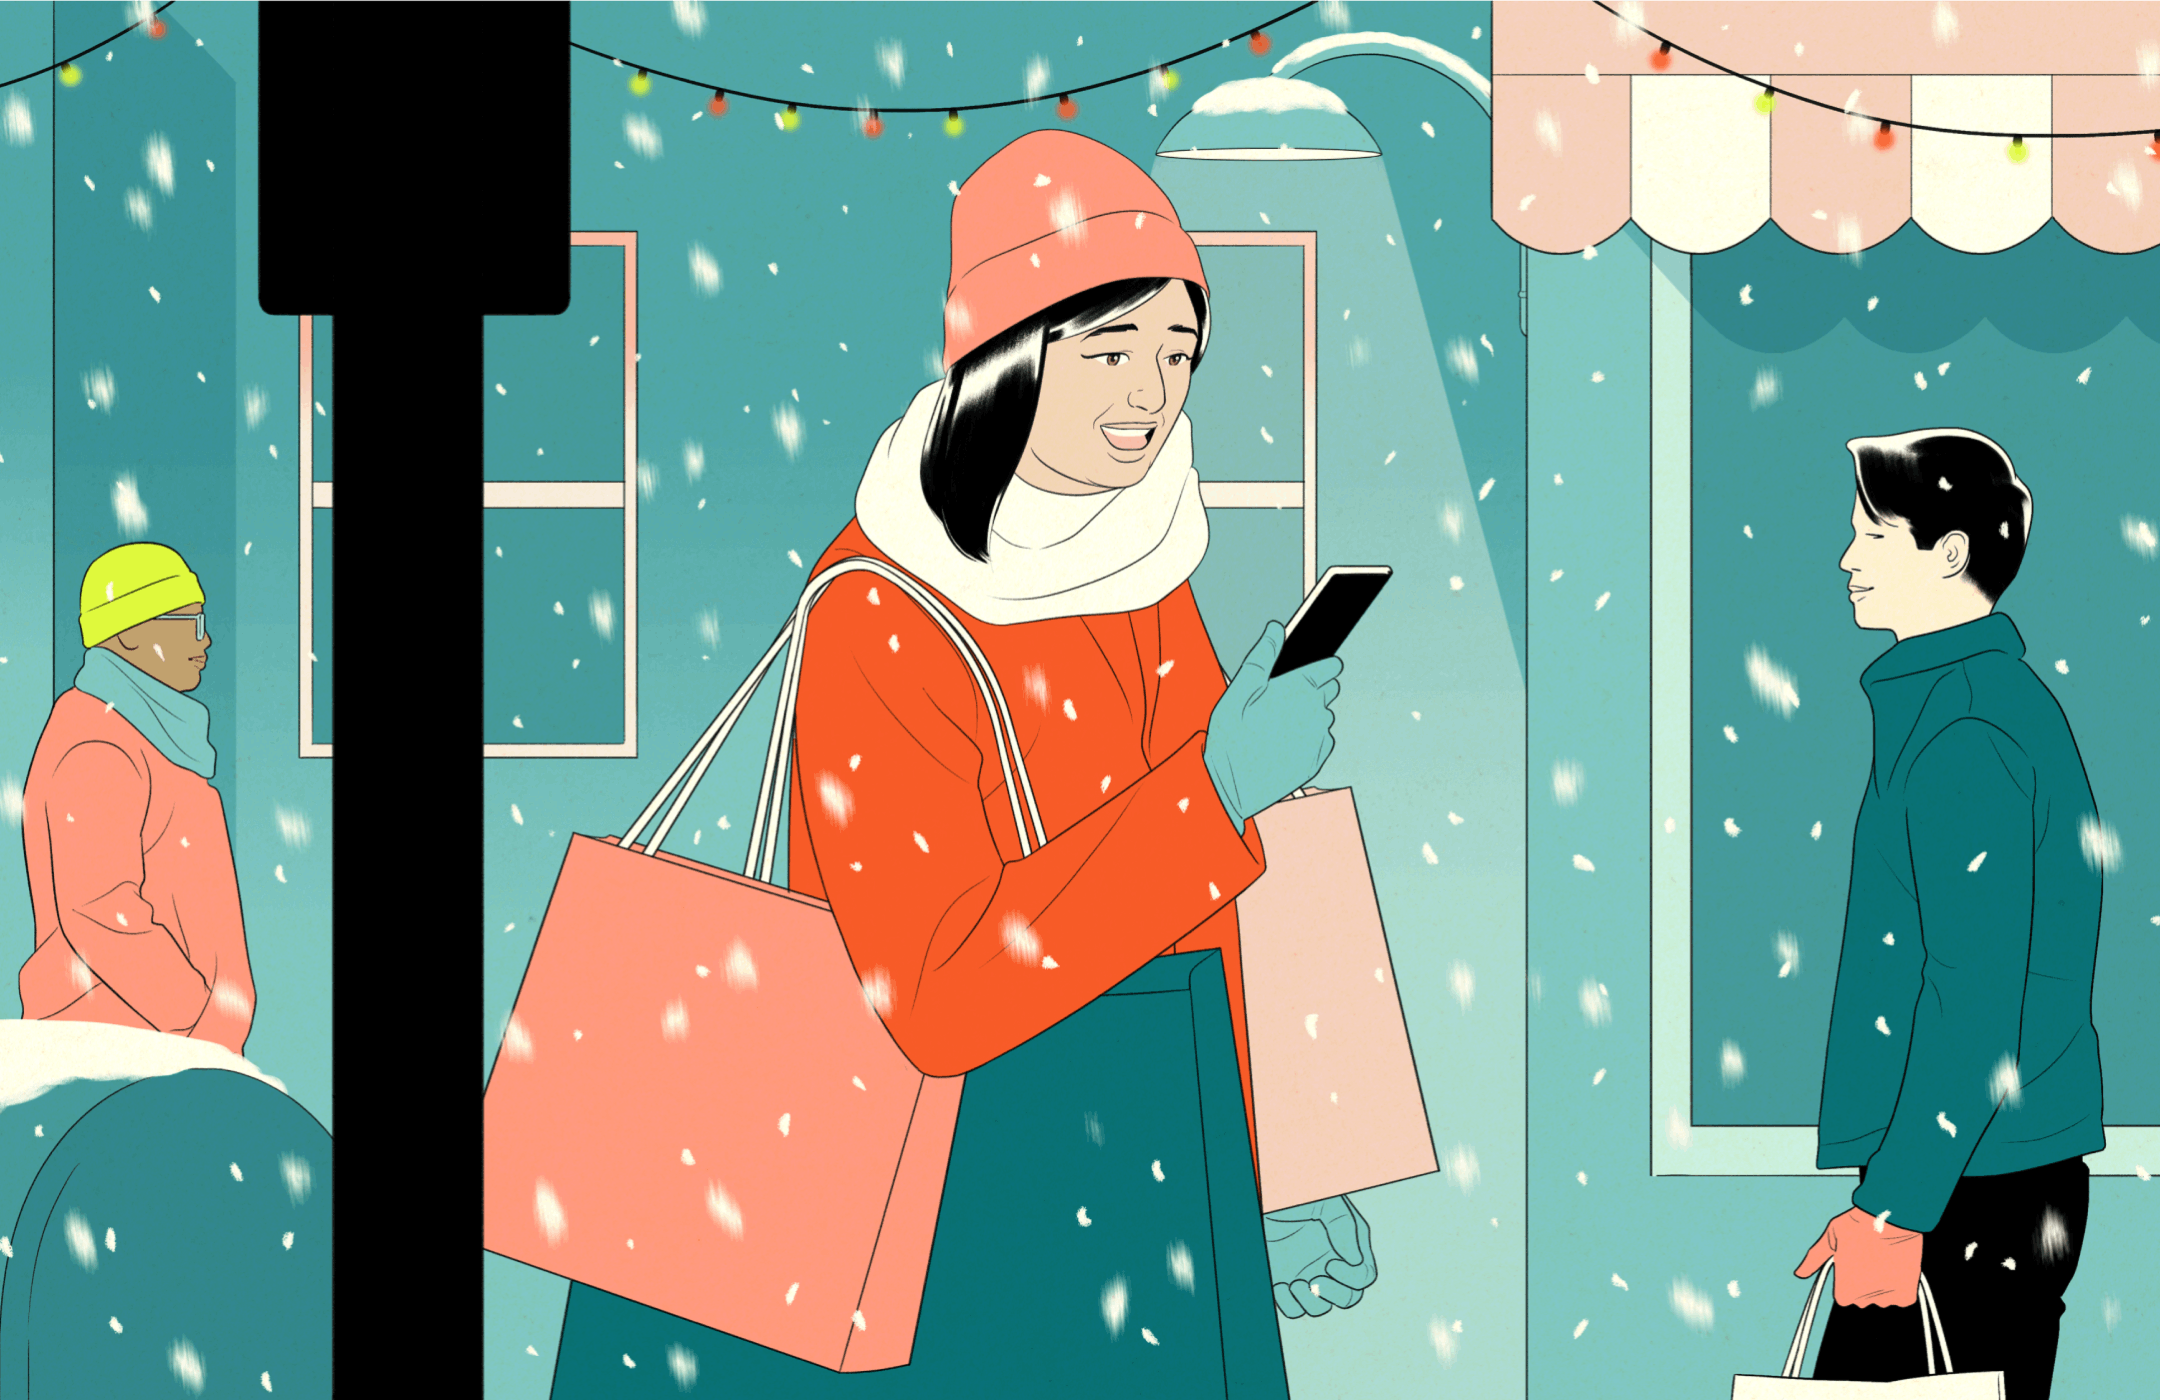 Illustration of woman holding shopping bags & looking at her phone in a flurry of snow.